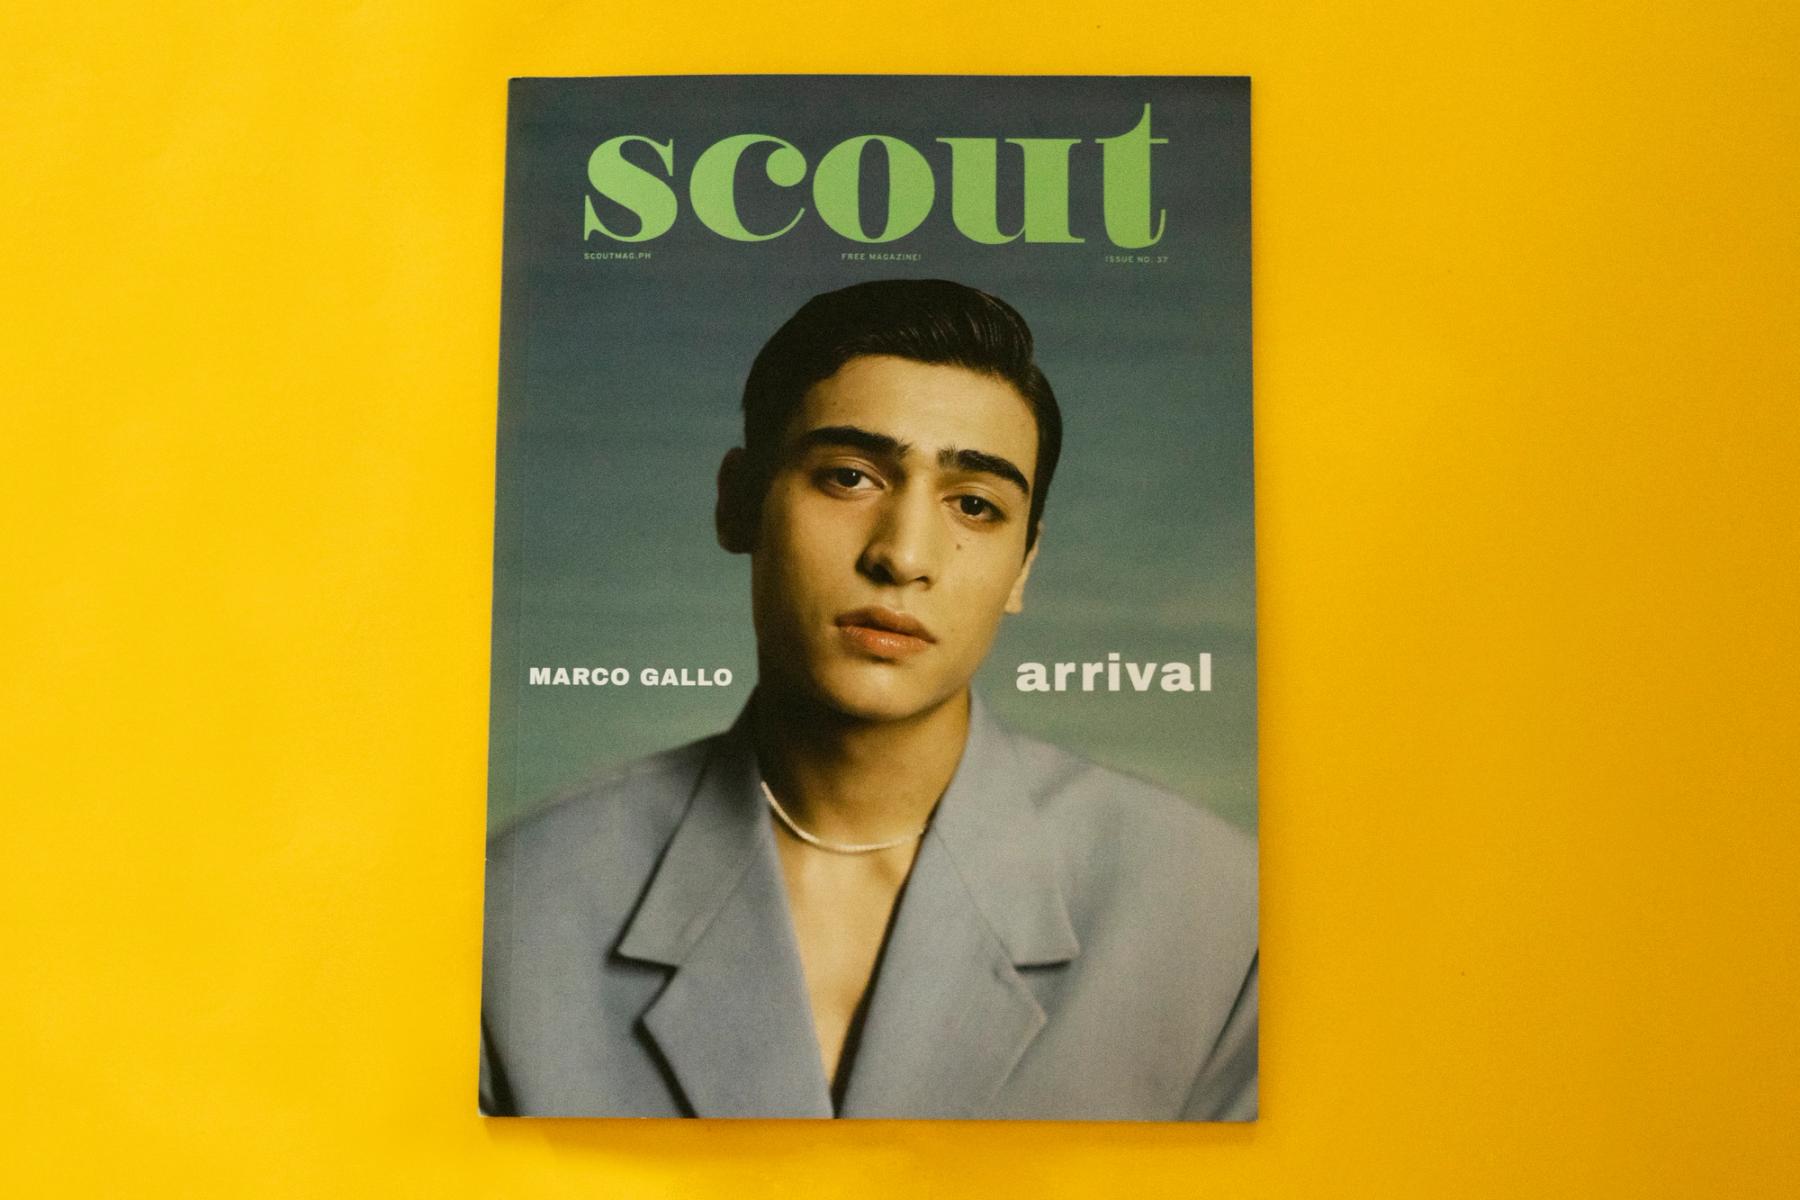 An issue of SCOUT on a yellow backdrop. The cover image is Marco Gallo and he is flanked by his name on the left (reader's side) and arrival on the right.